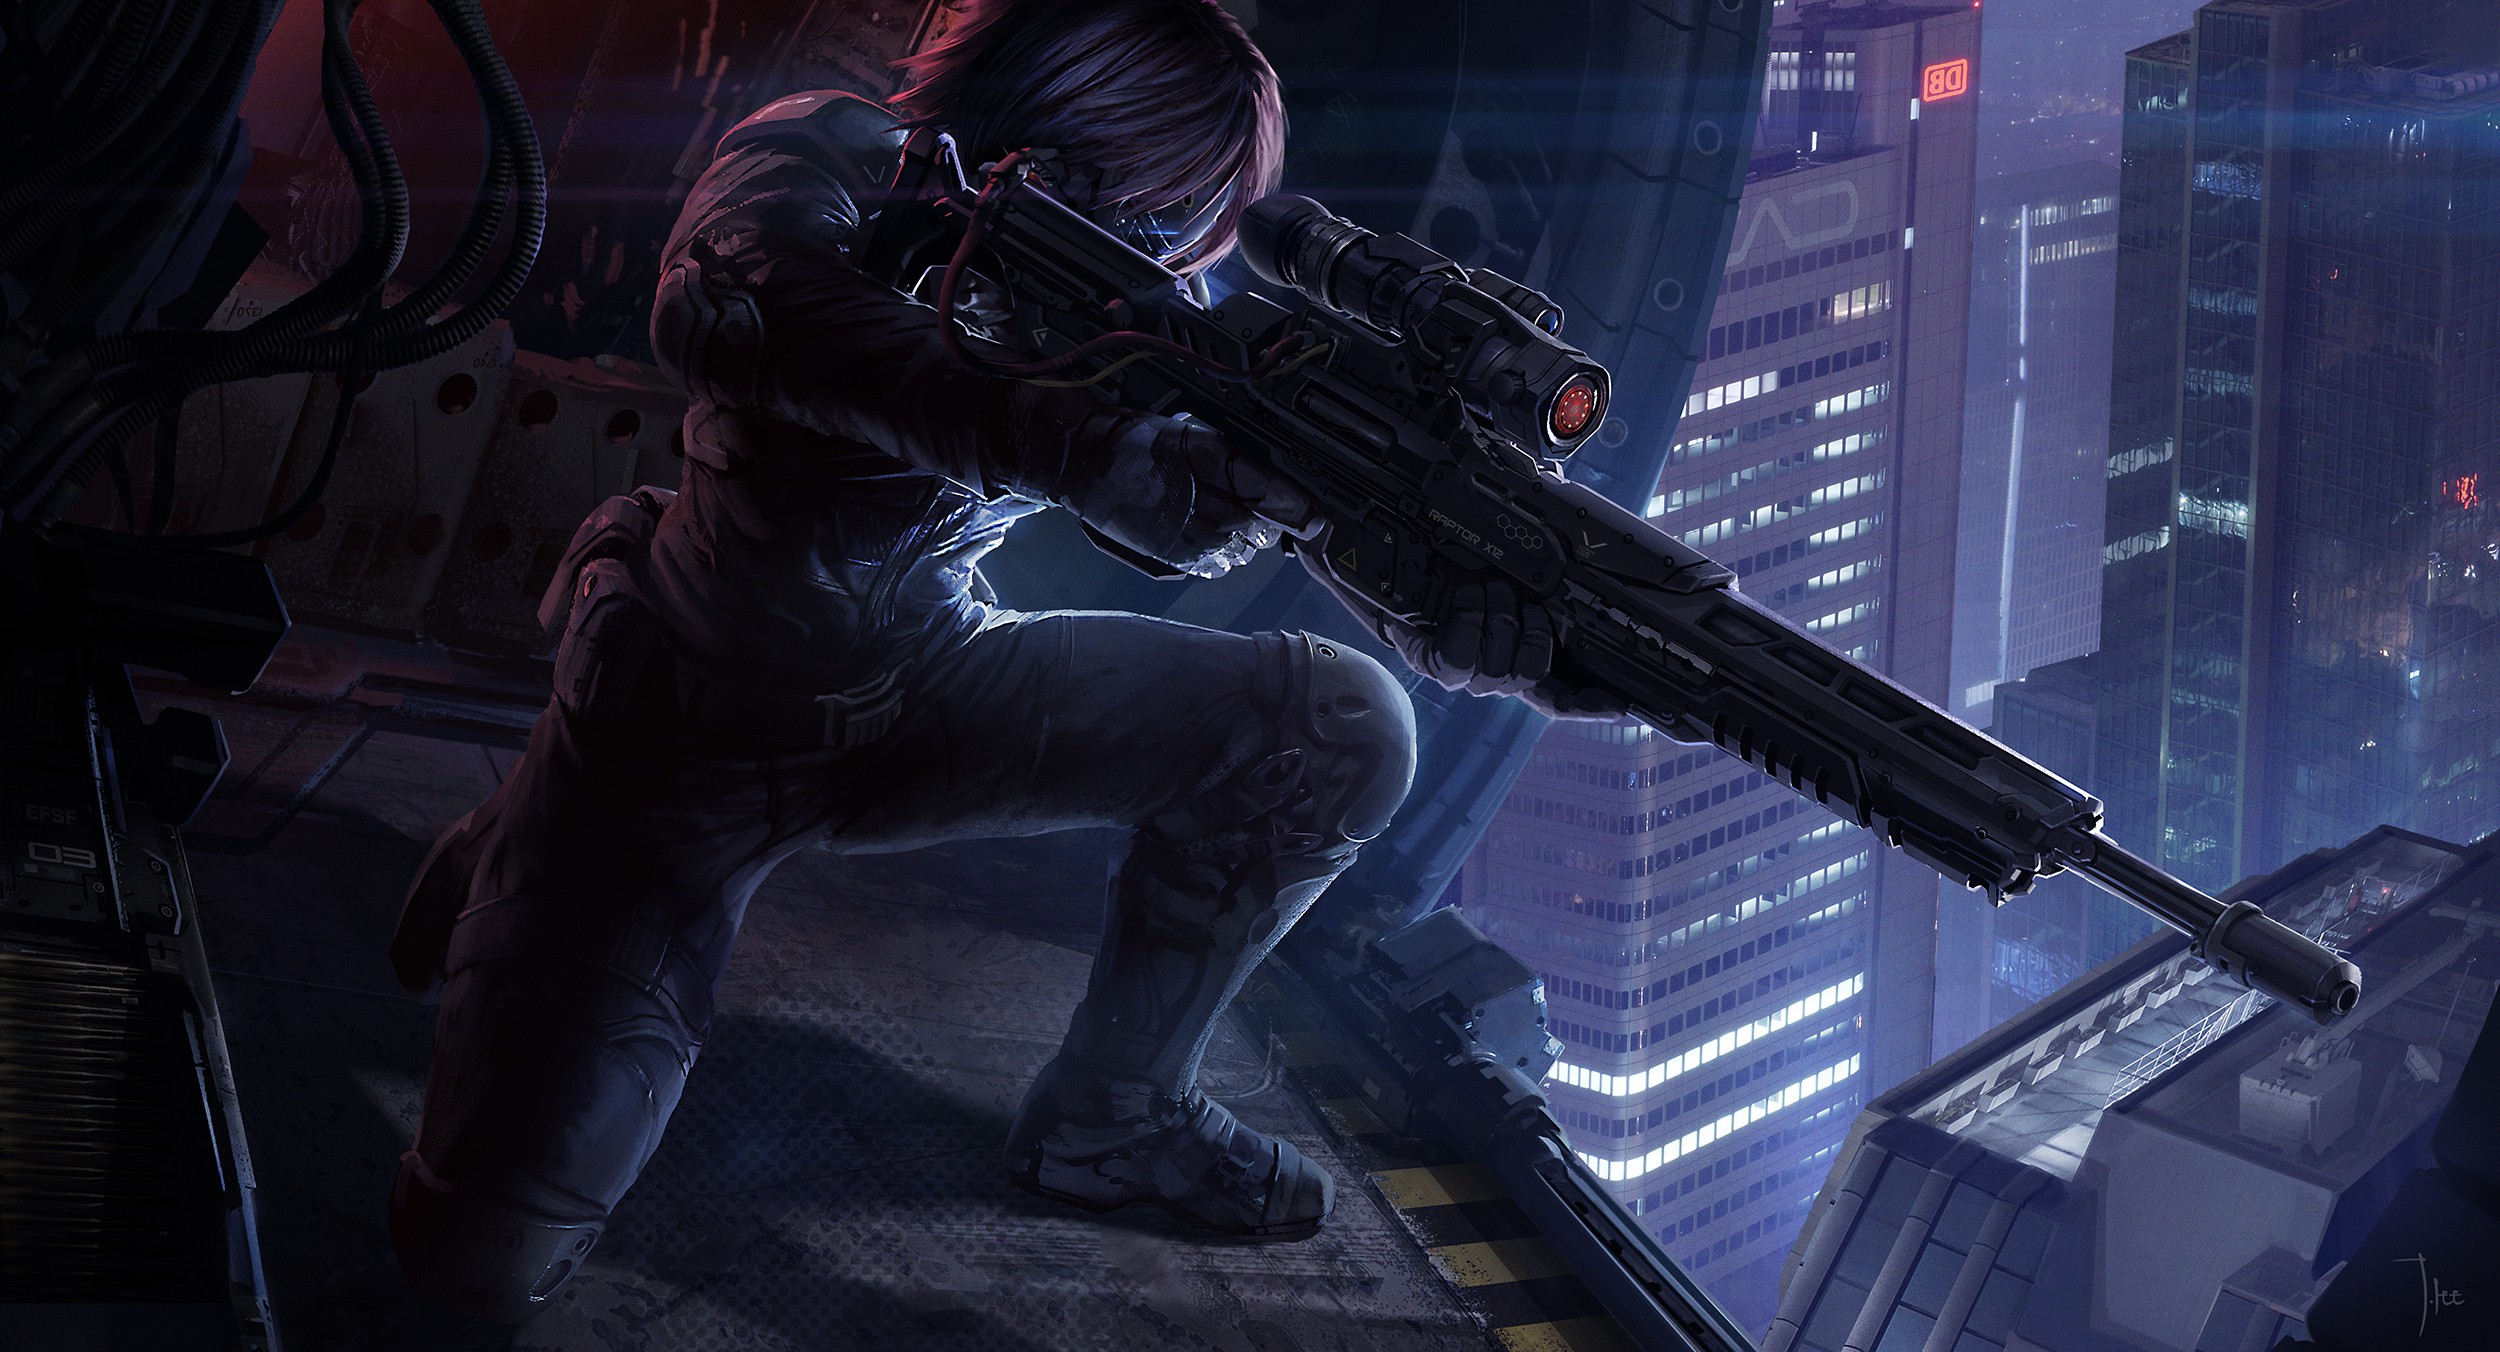 General 2500x1352 futuristic sniper rifle soldier helicopters city aiming weapon kneeling digital art signature gun night building city lights